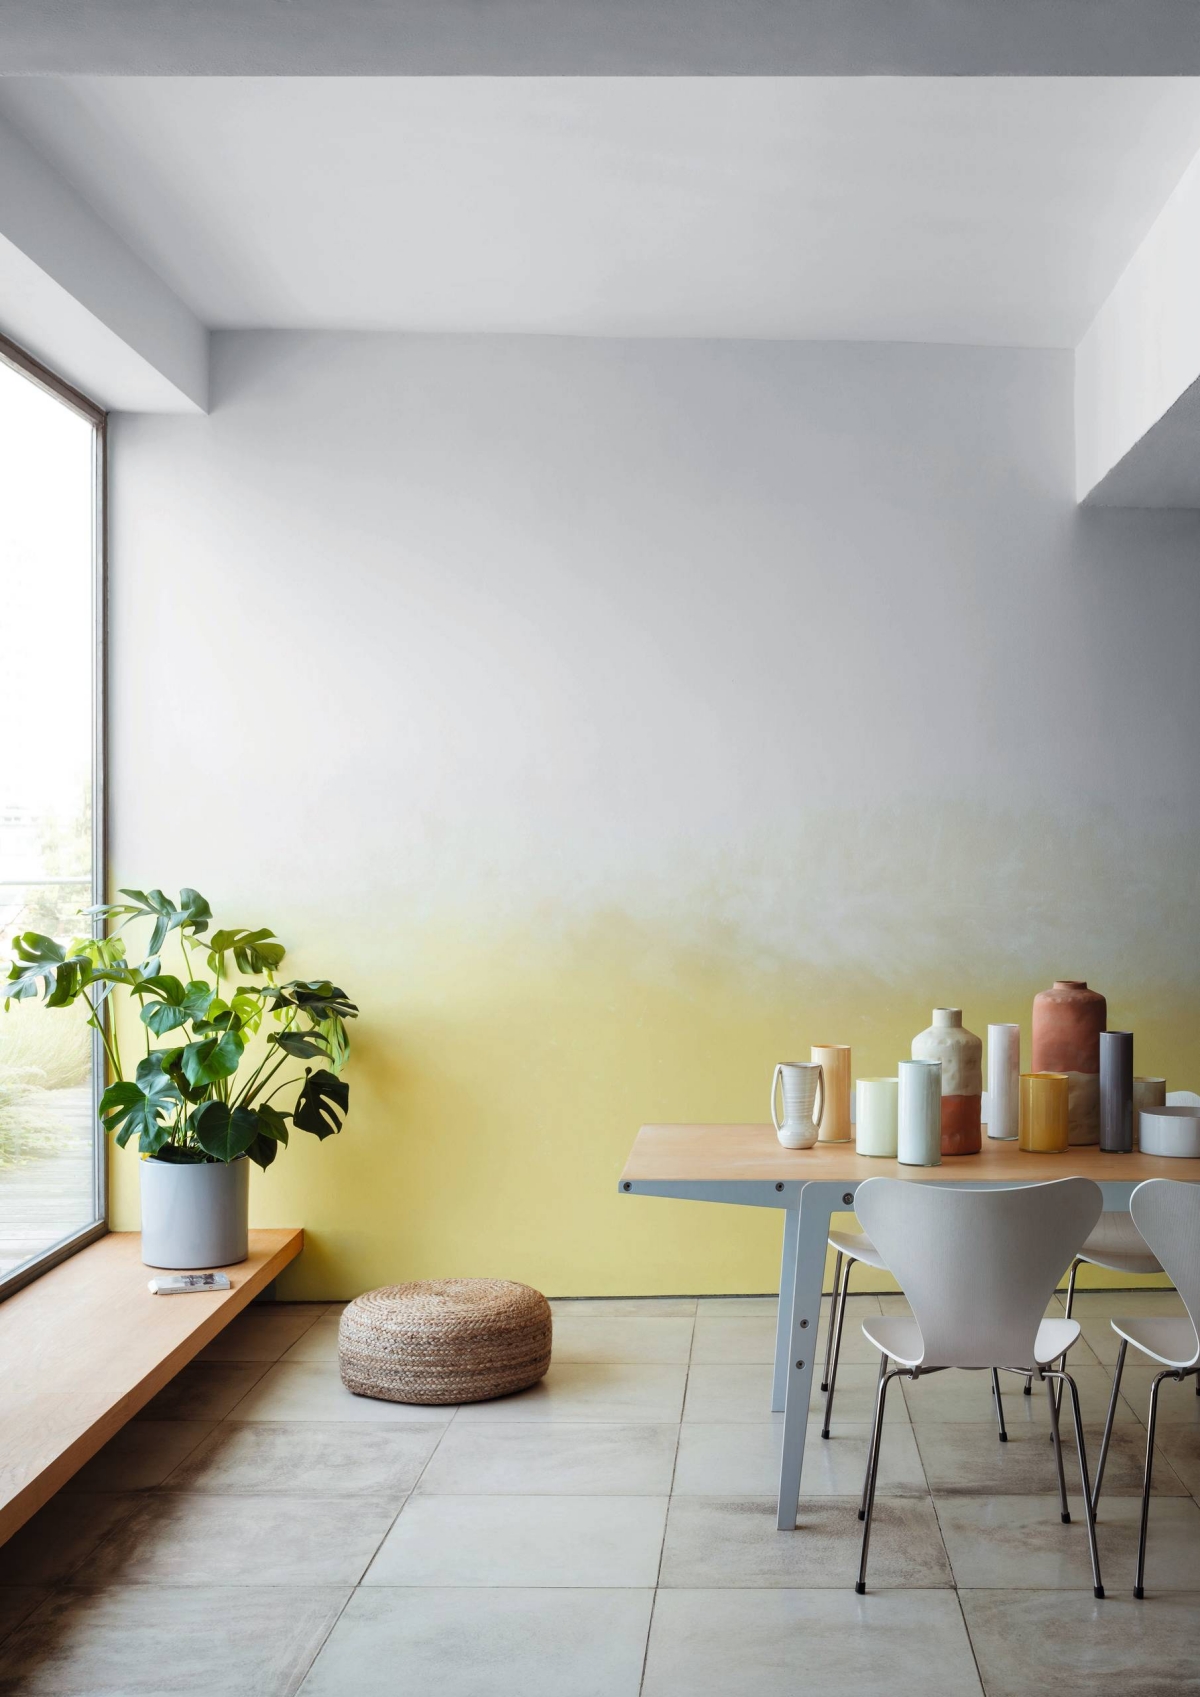 7 Good Reasons to Paint Your Home Walls White